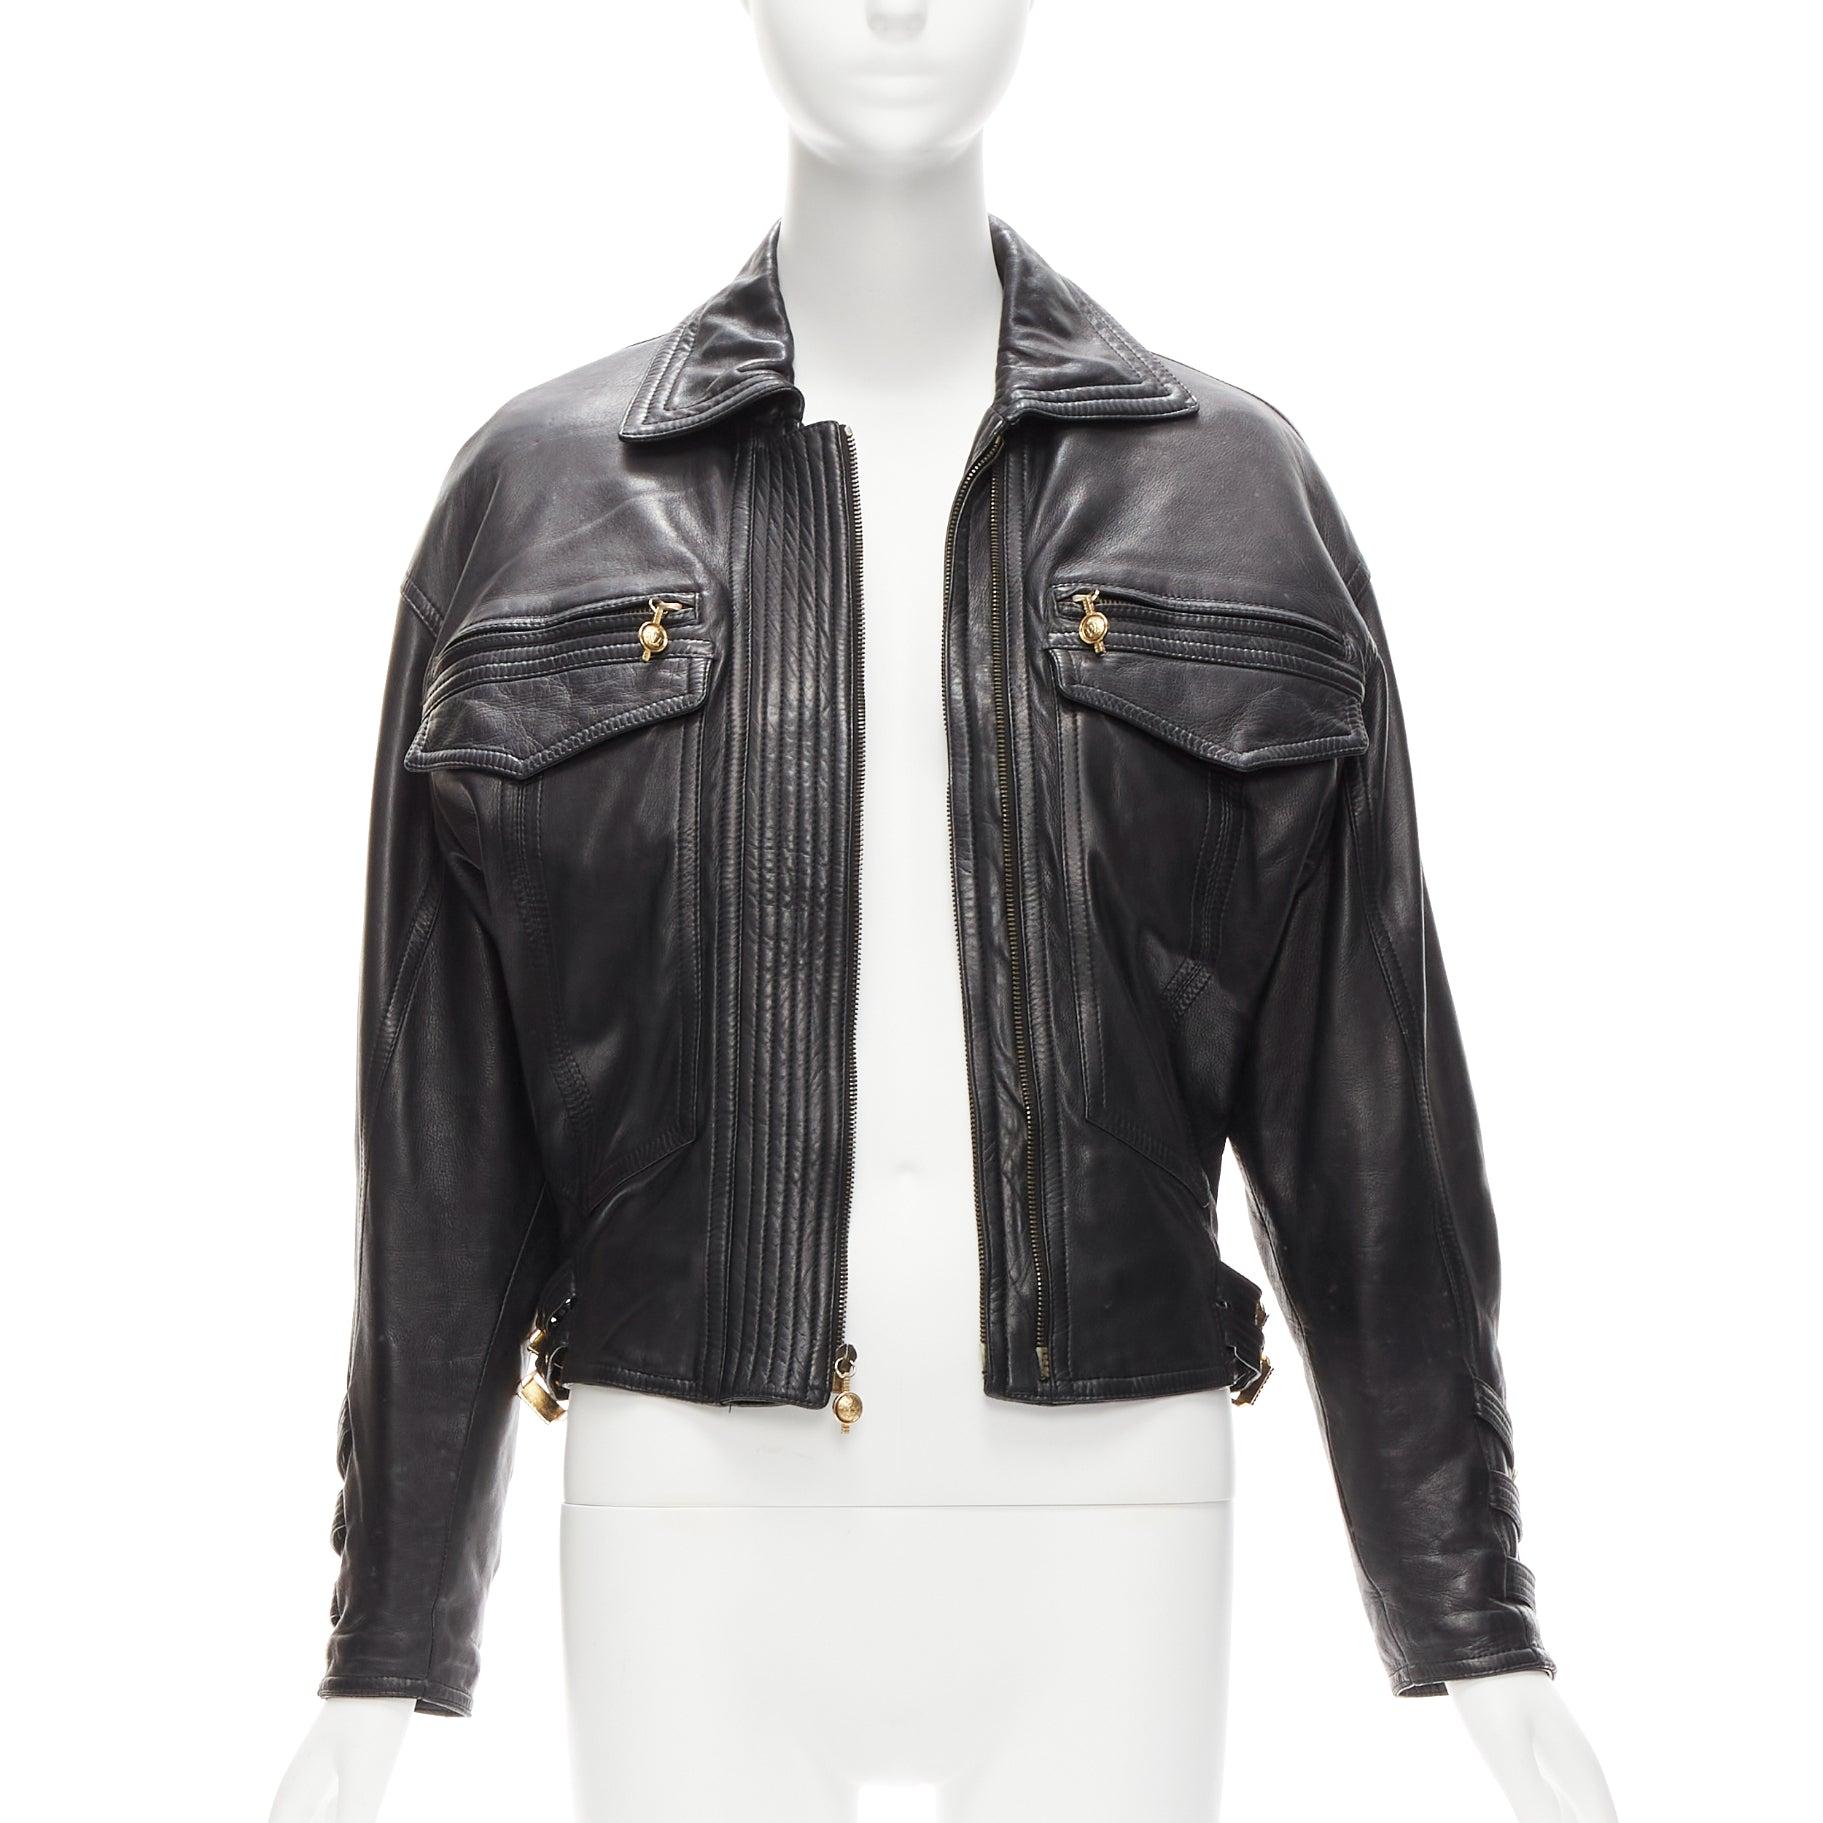 GIANNI VERSACE 1992 S&M black leather gold bondage buckle bomber IT38 XS
Reference: TGAS/D00922
Brand: Gianni Versace
Designer: Gianni Versace
Collection: 1992 S&M
Material: Leather
Color: Black, Gold
Pattern: Solid
Closure: Zip
Lining: Black